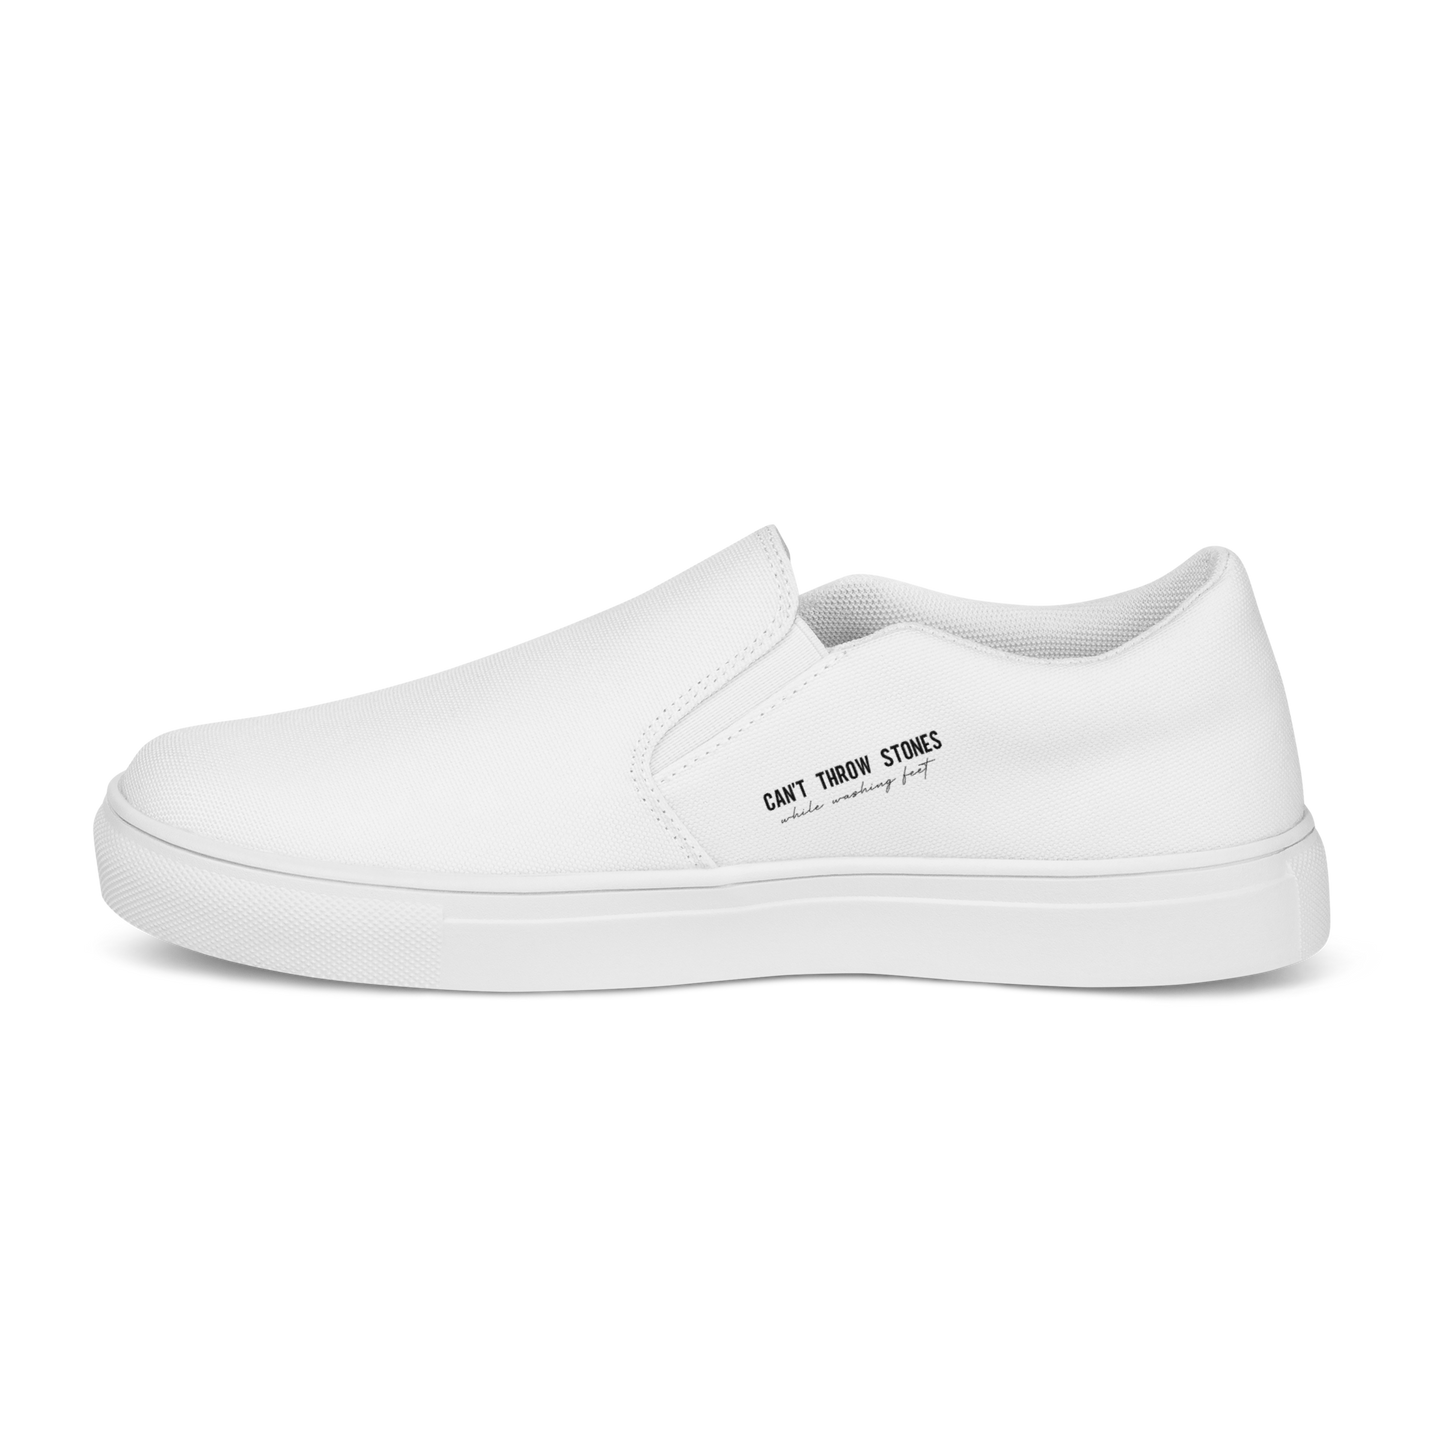 Women’s Slip-On Canvas Shoes | Can’t Throw Stones While Washing Feet